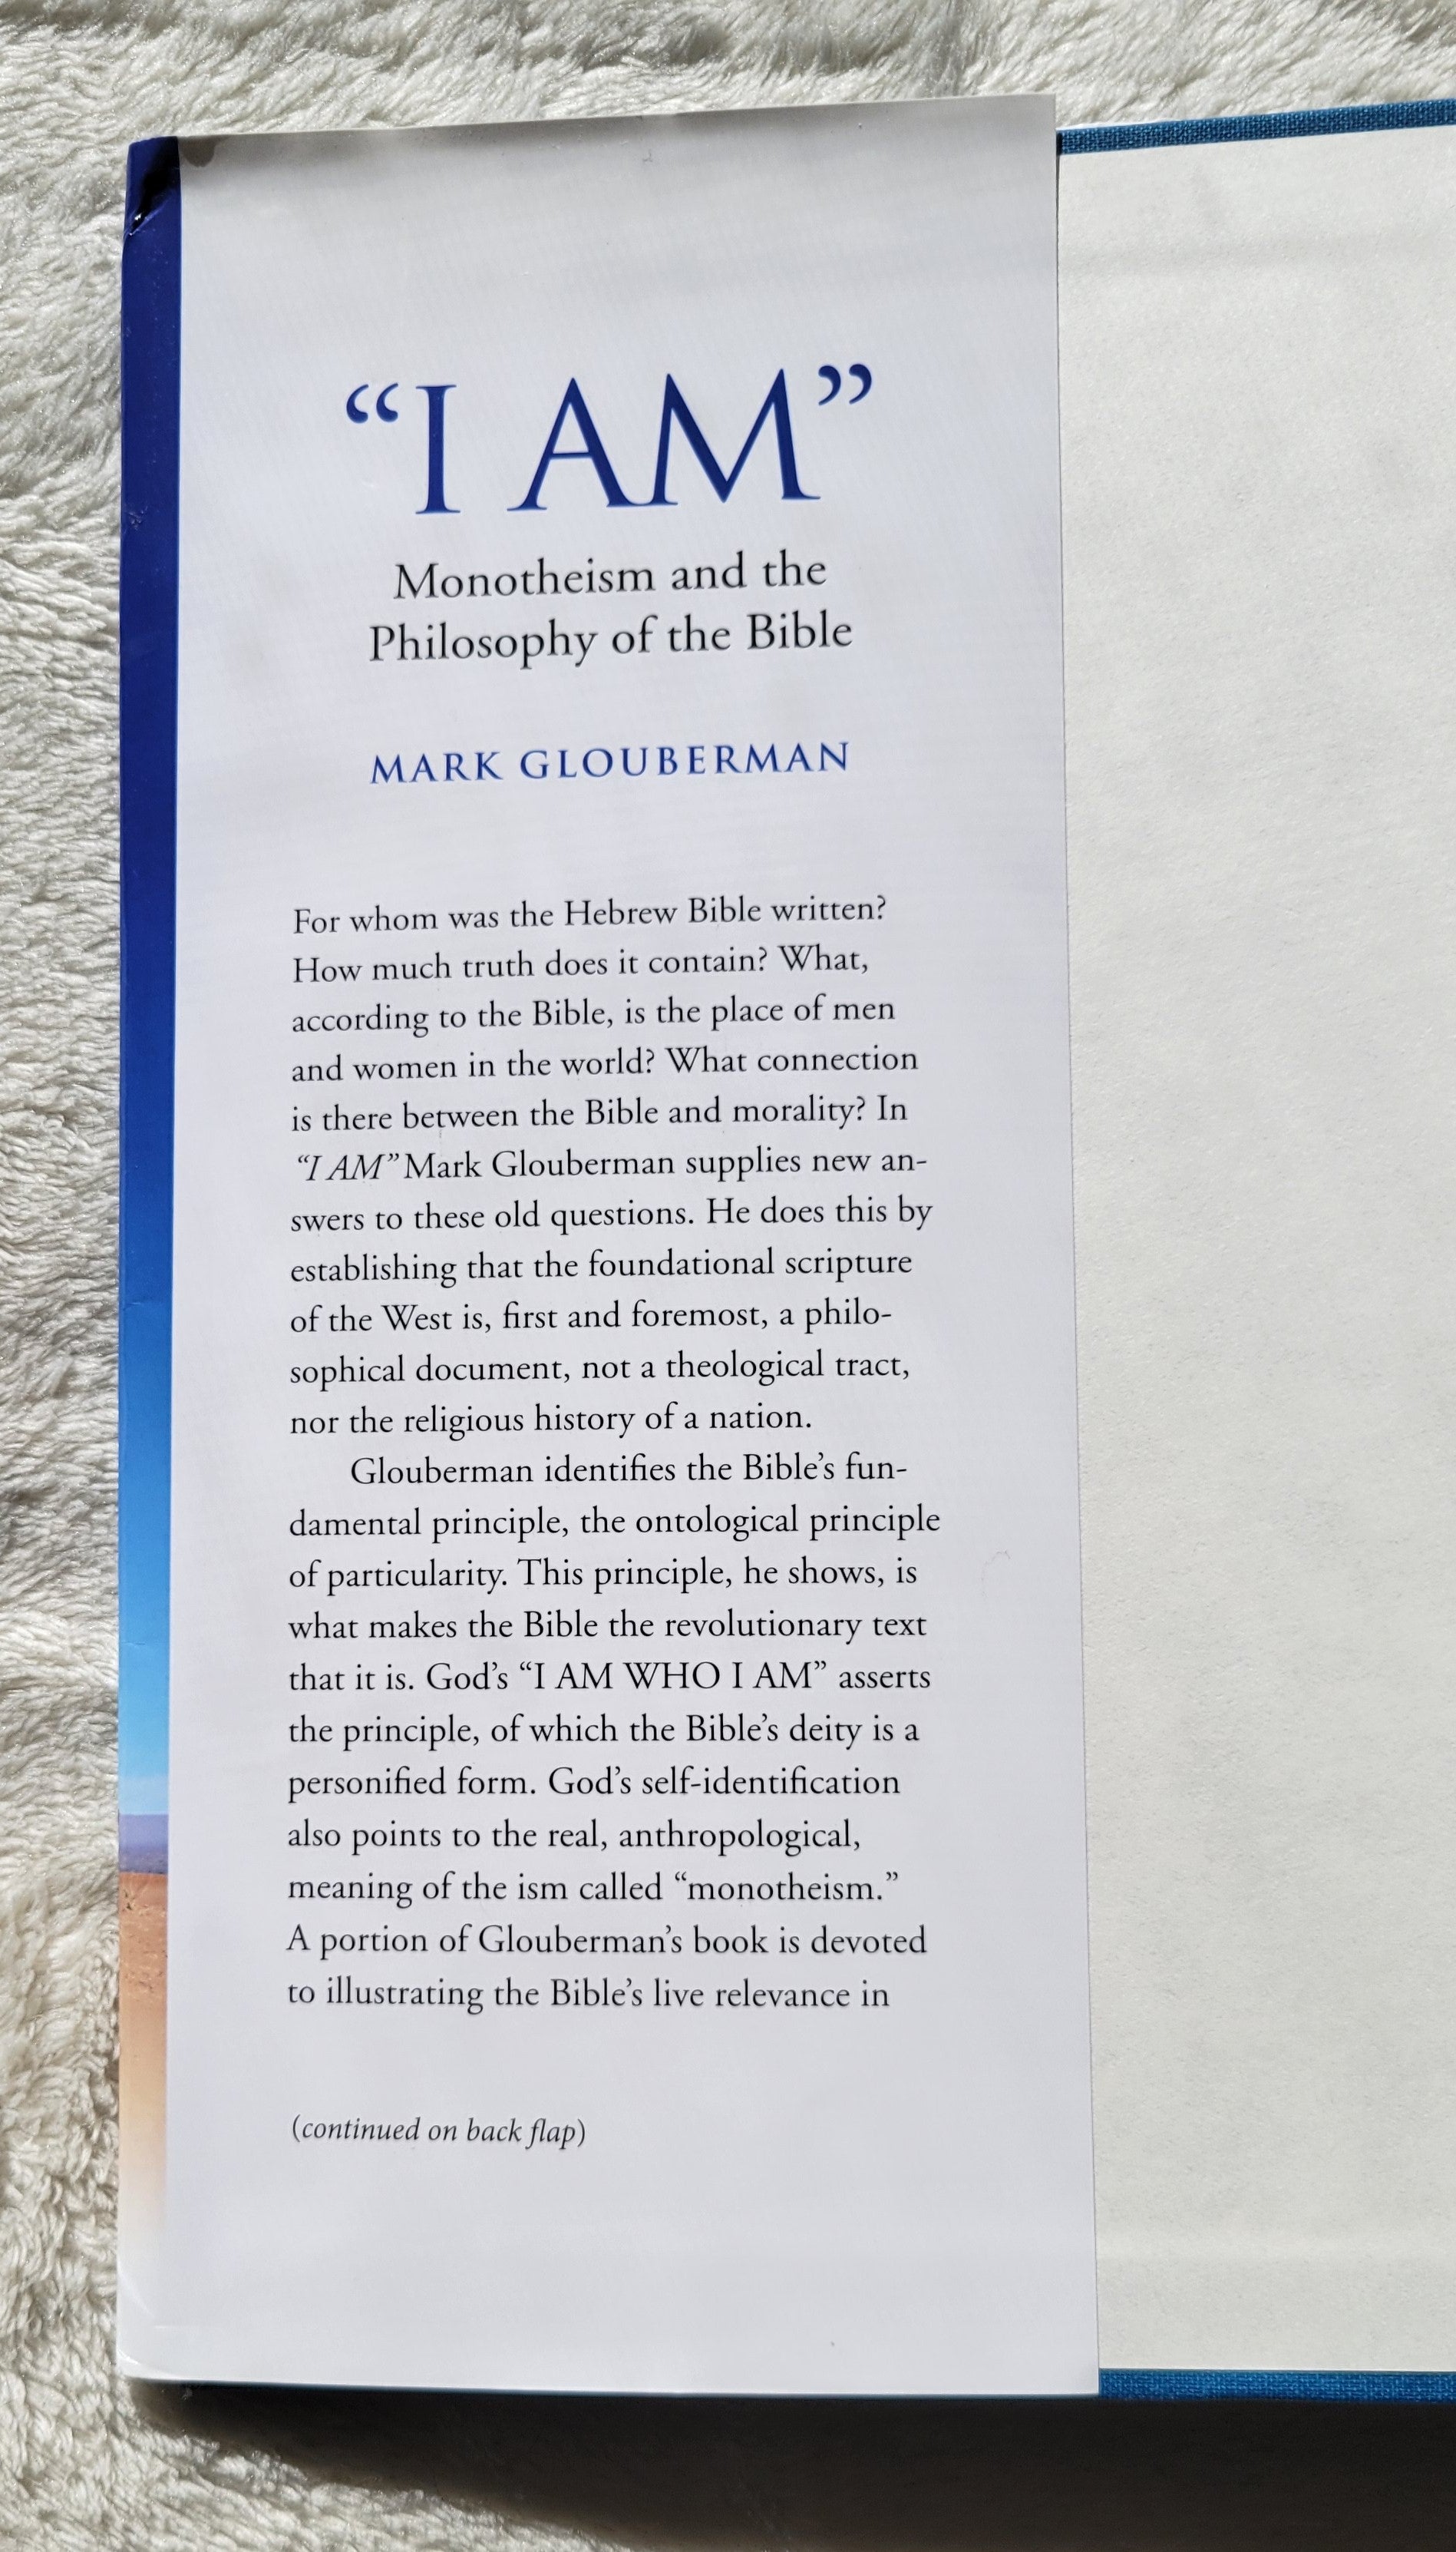 Used book for sale "I Am: Monotheism and the Philosophy of the Bible" by Mark Glouberman, University of Toronto Press, 2019. View of jacket panel.